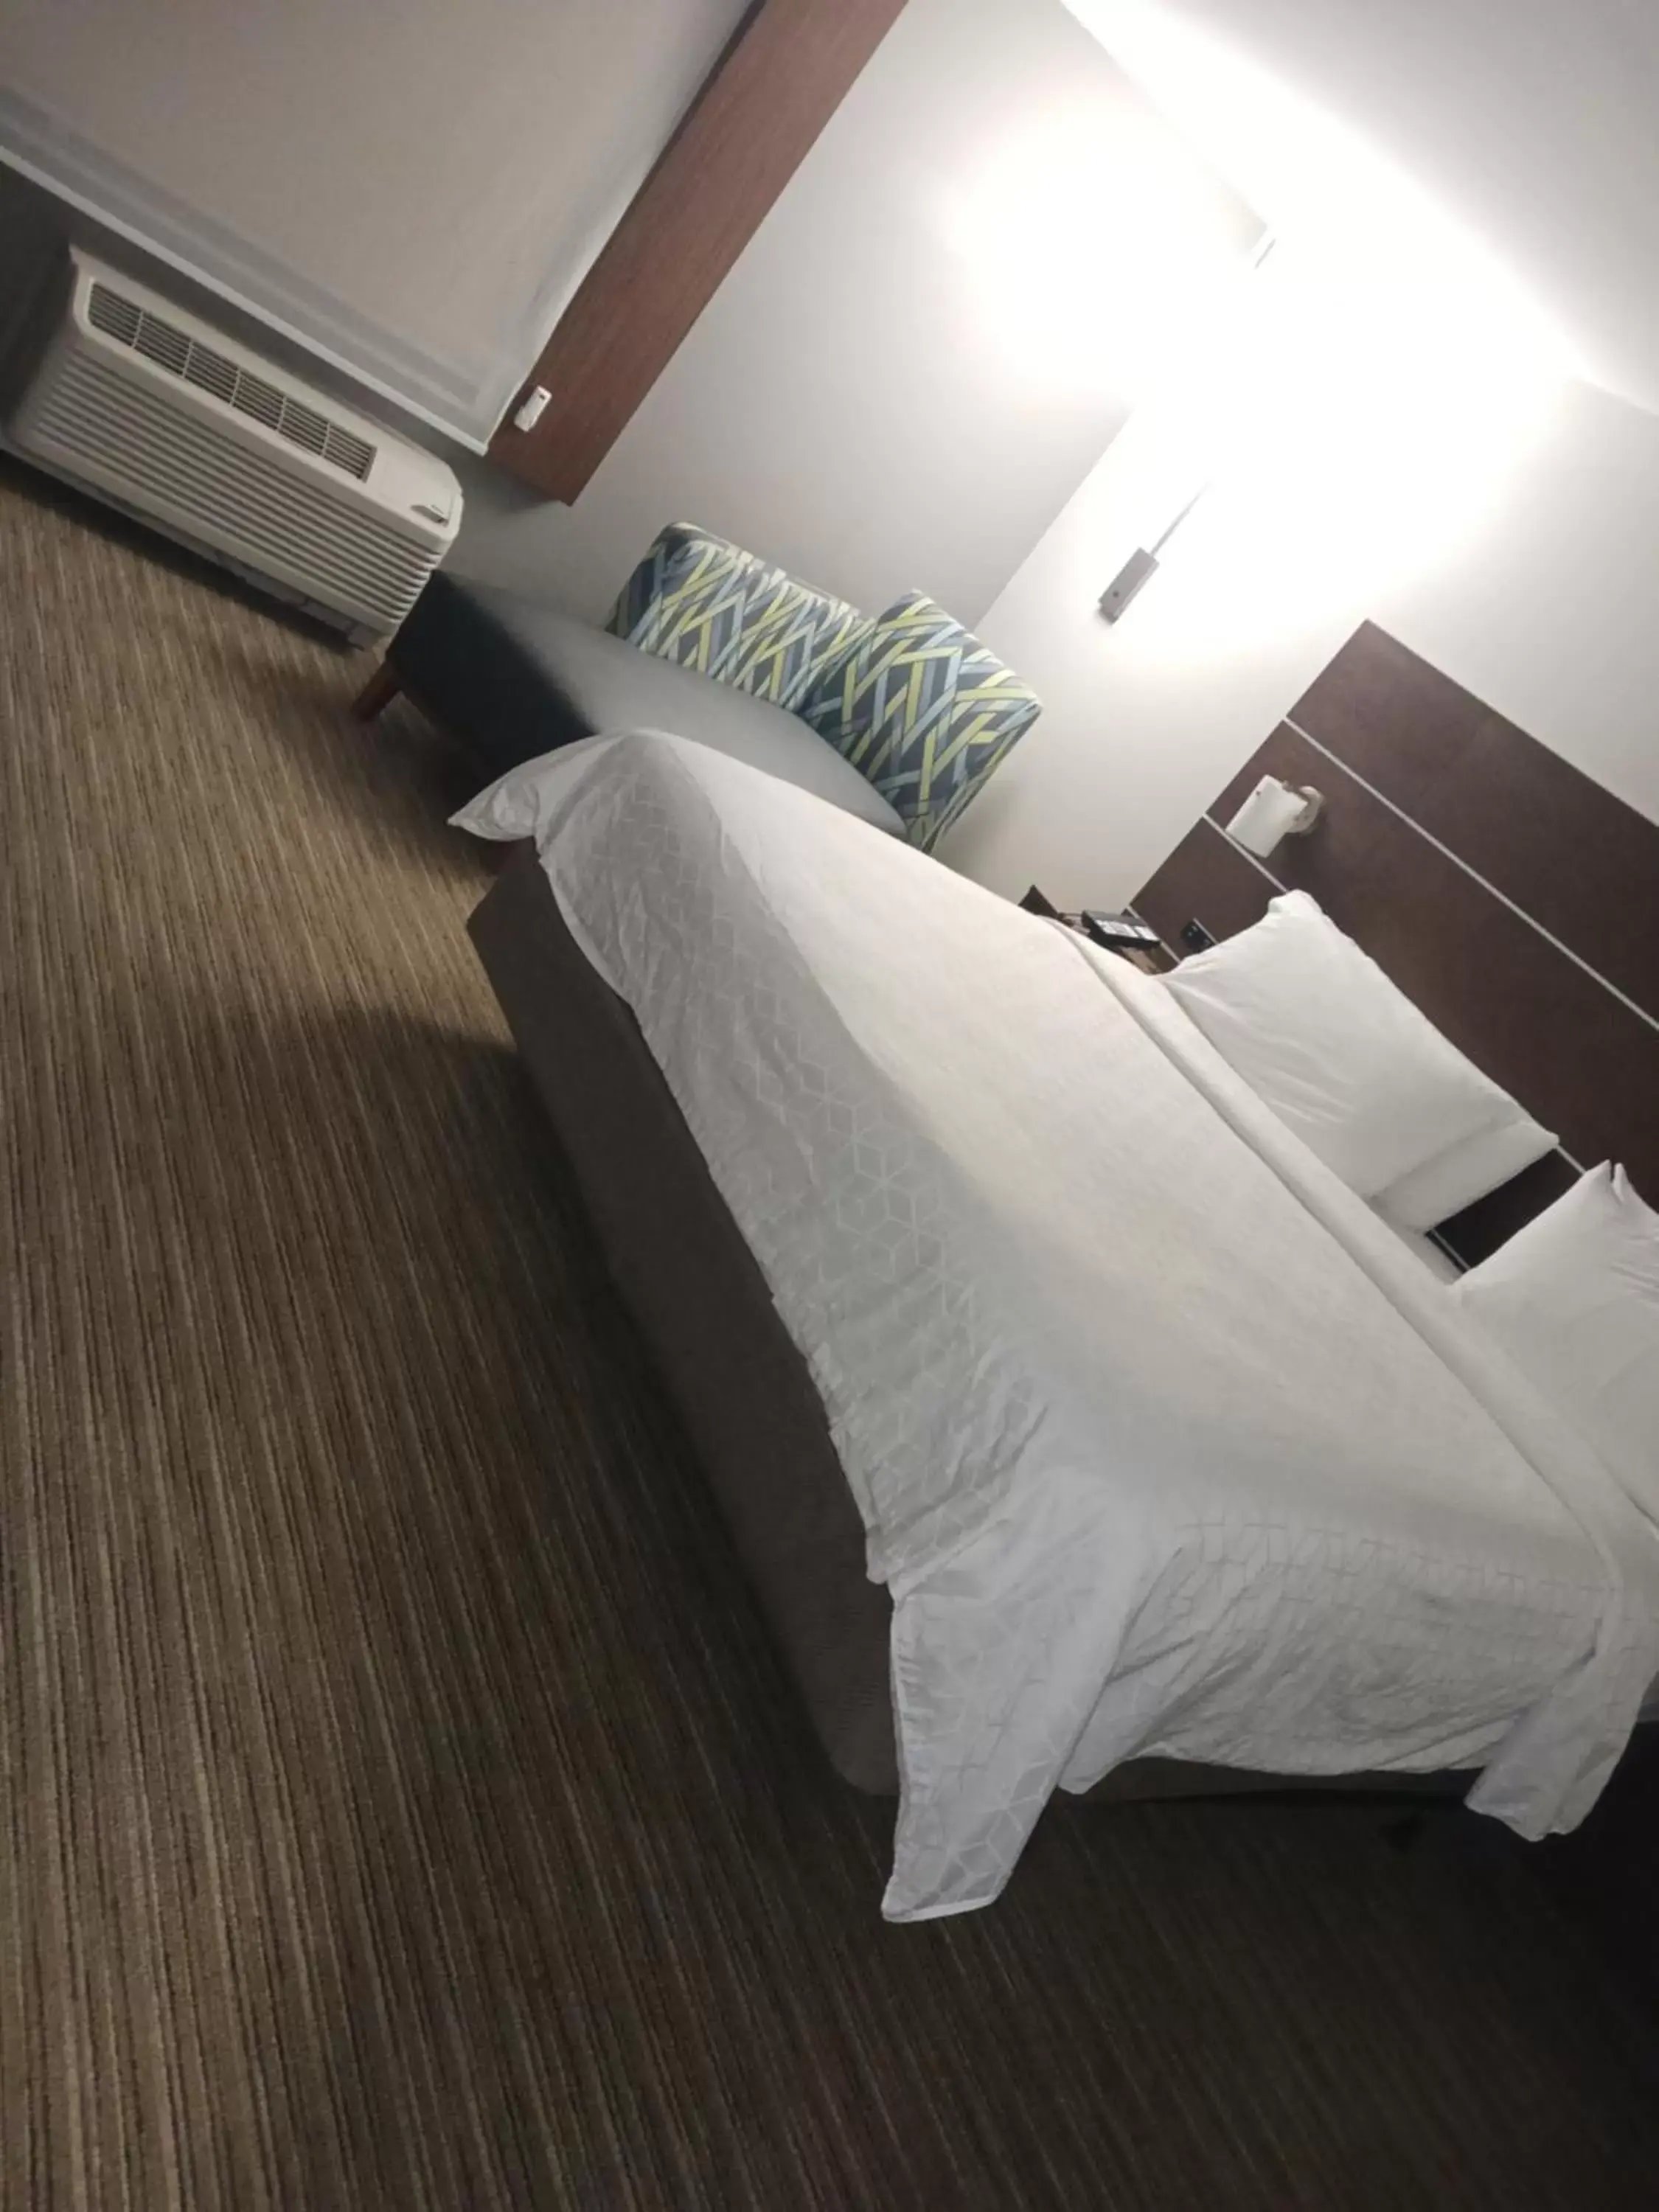 Bed in Holiday Inn Express & Suites Gainesville - Lake Lanier Area, an IHG Hotel